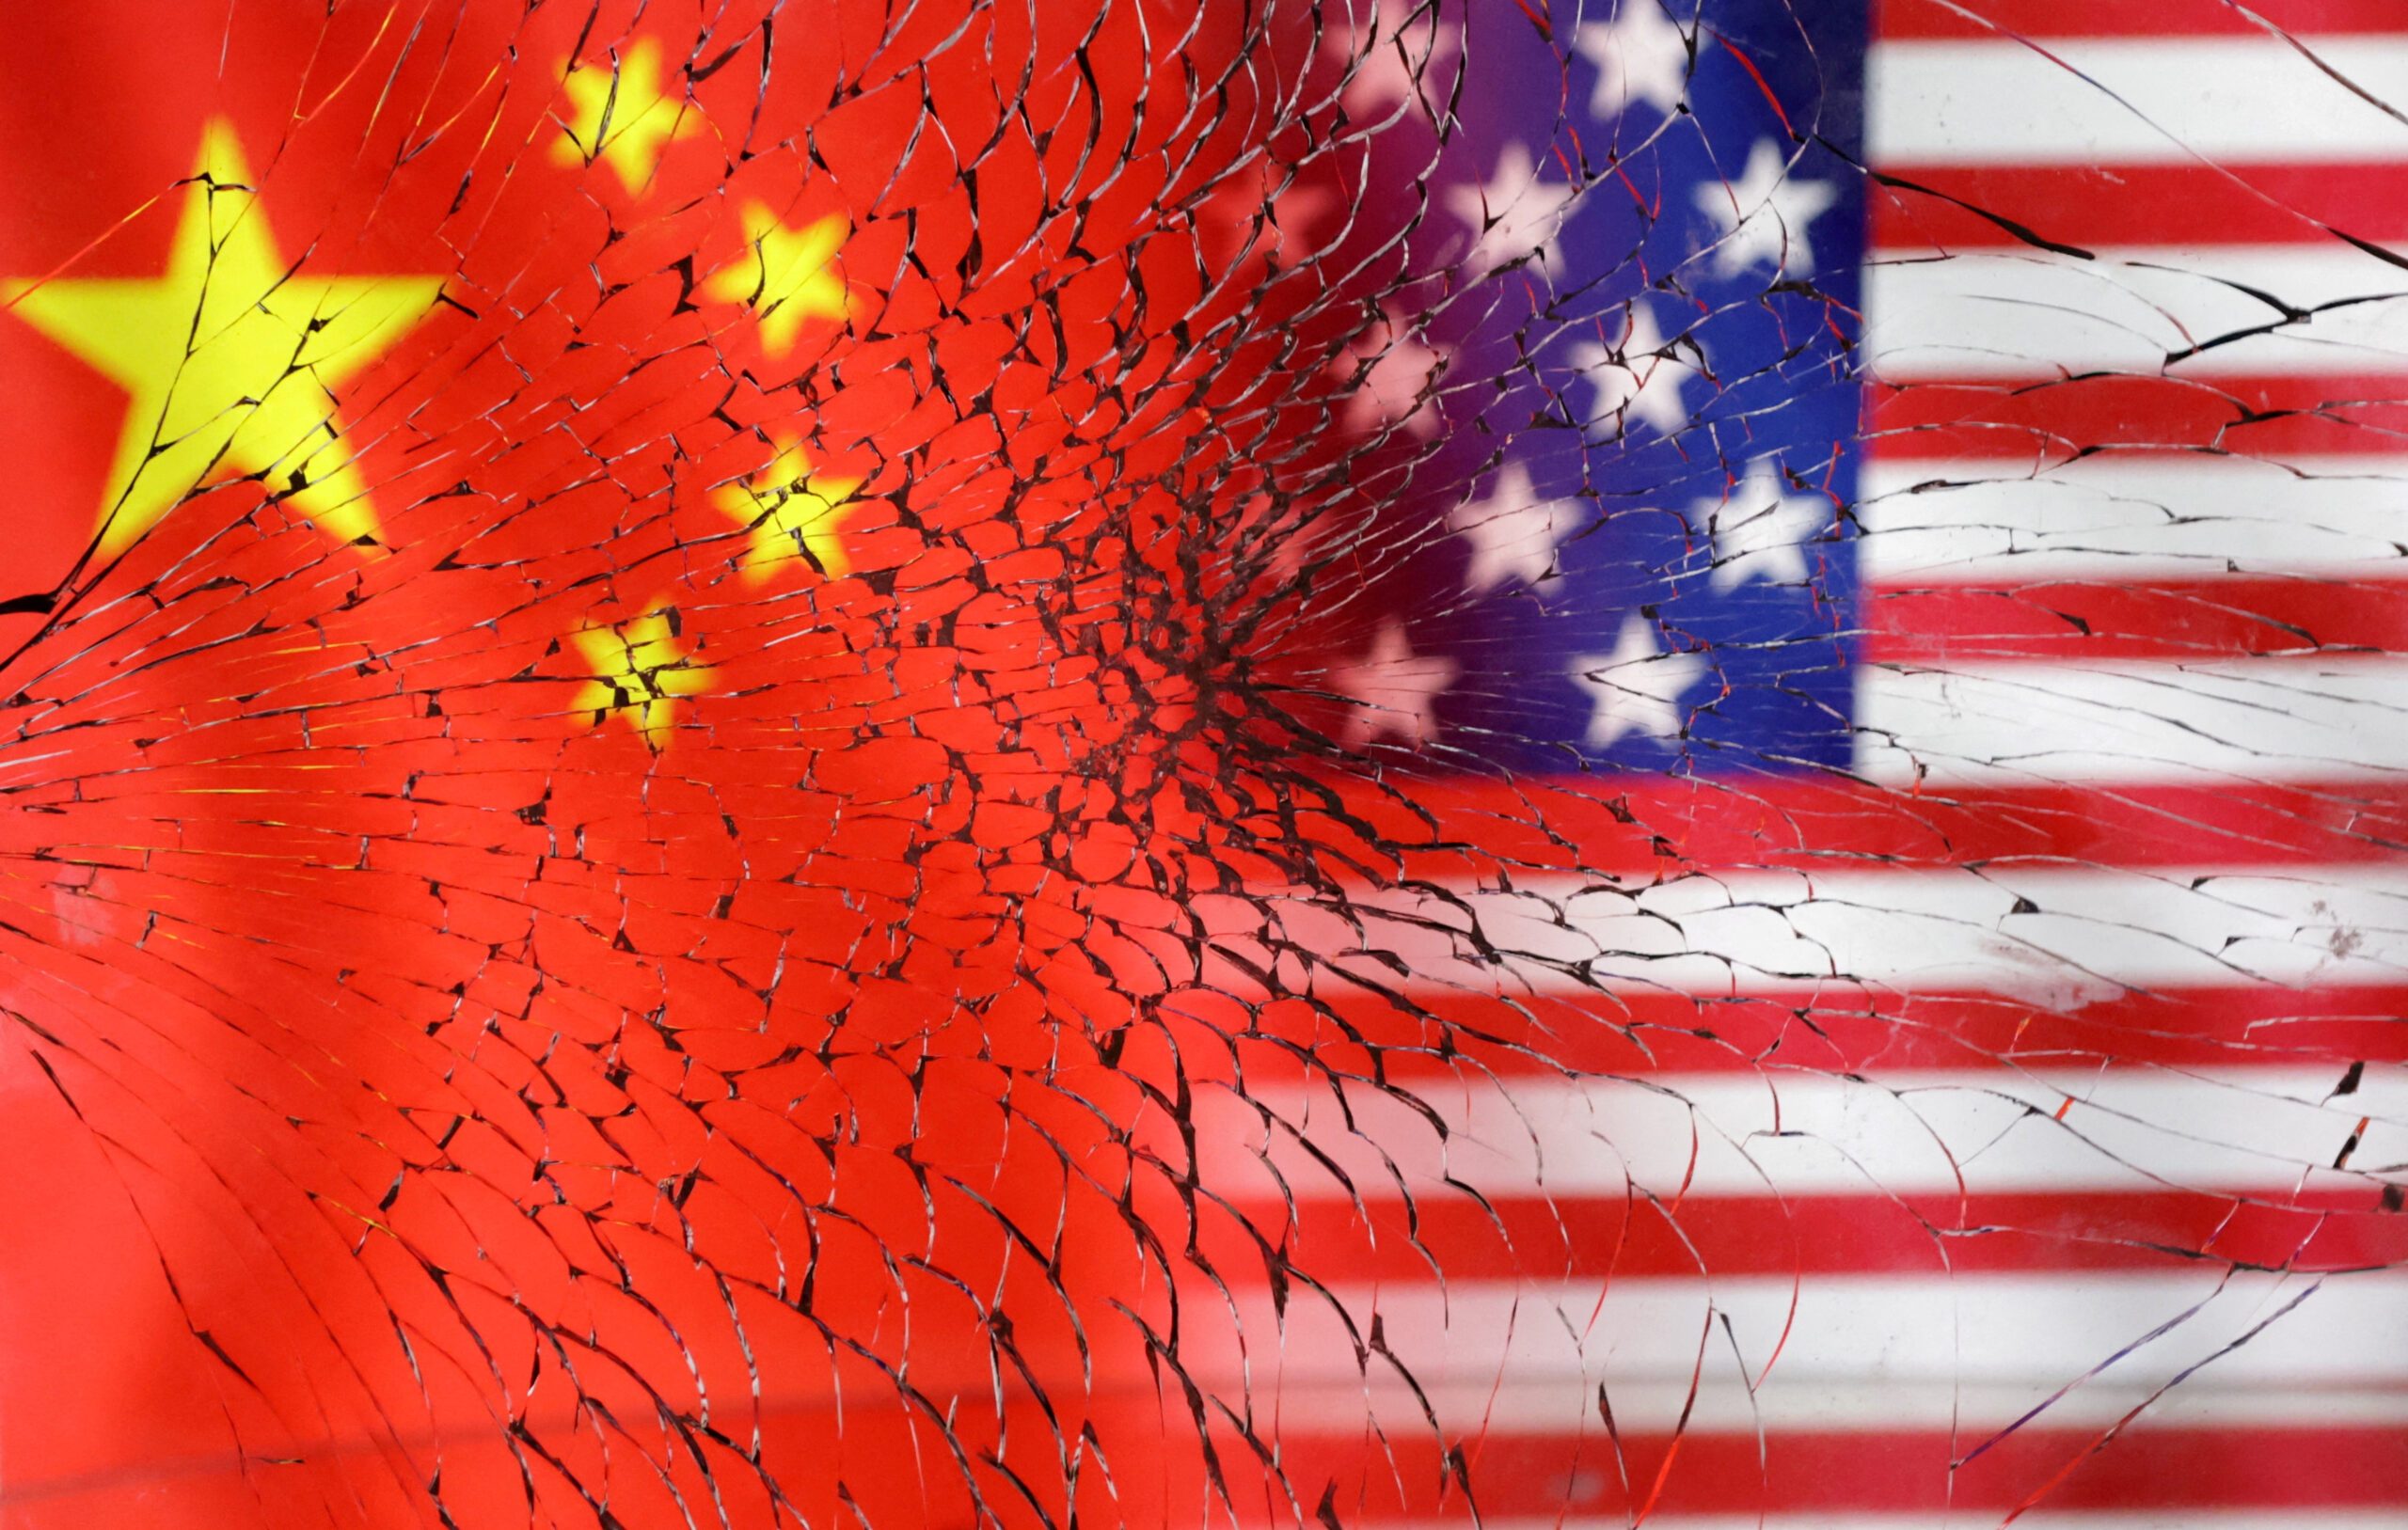 IDG Capital in Pentagon's crosshairs signals growing risks for Chinese investors in US